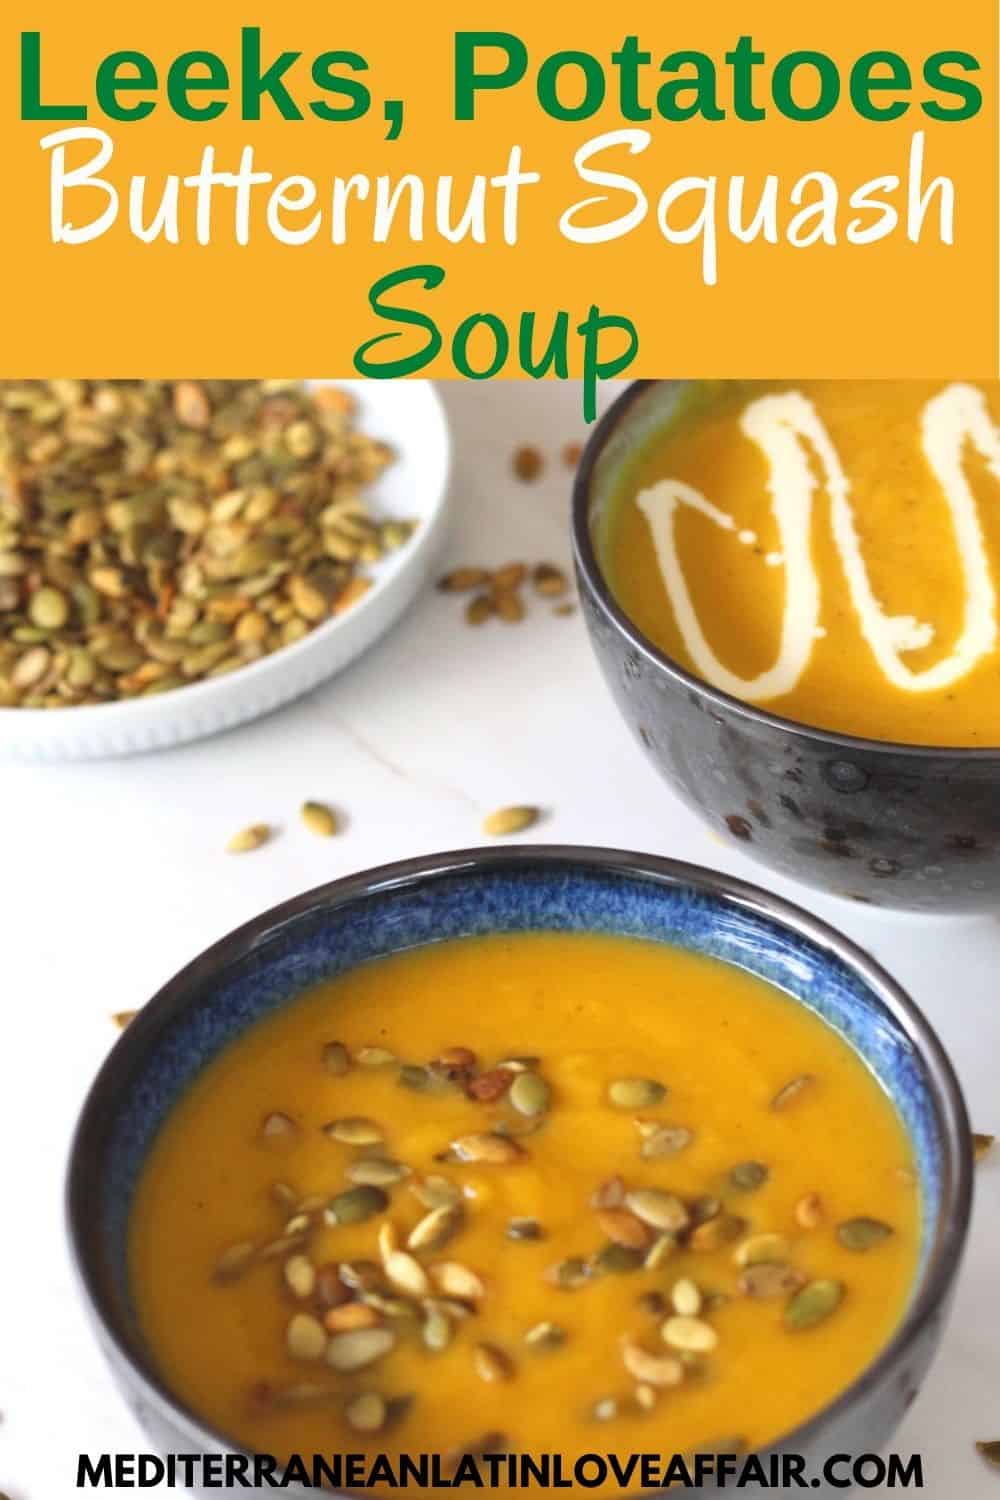 An image prepared specifically for Pinterest. It shows the picture of 2 bowls of soup: one topped with pepitas and the other topped with cream. On the background there's a plate with just pepitas. Image has a title bar on top and website link on the bottom.